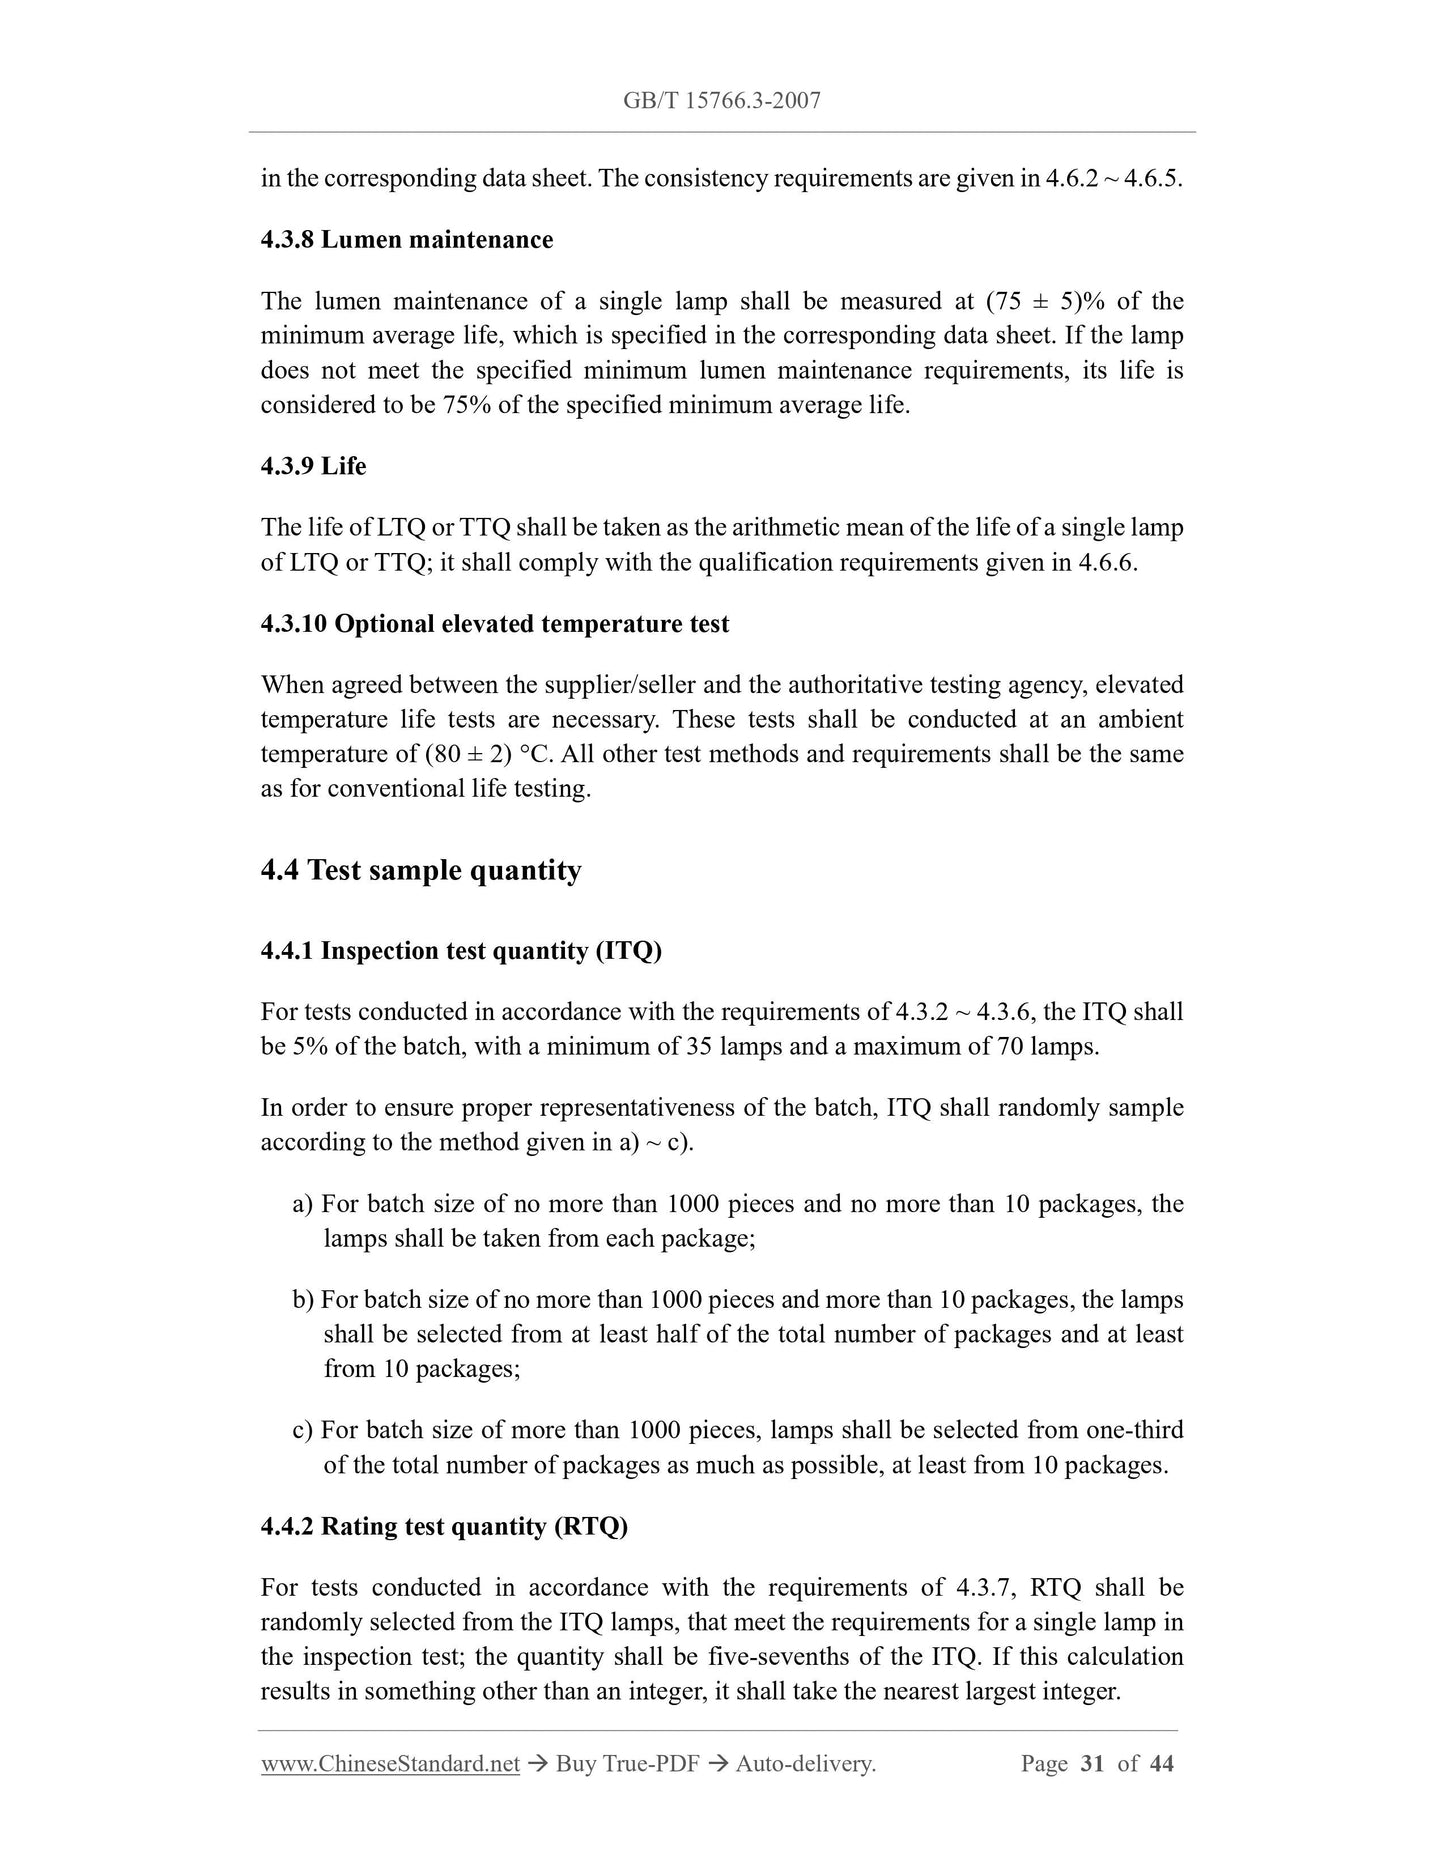 GB/T 15766.3-2007 Page 10